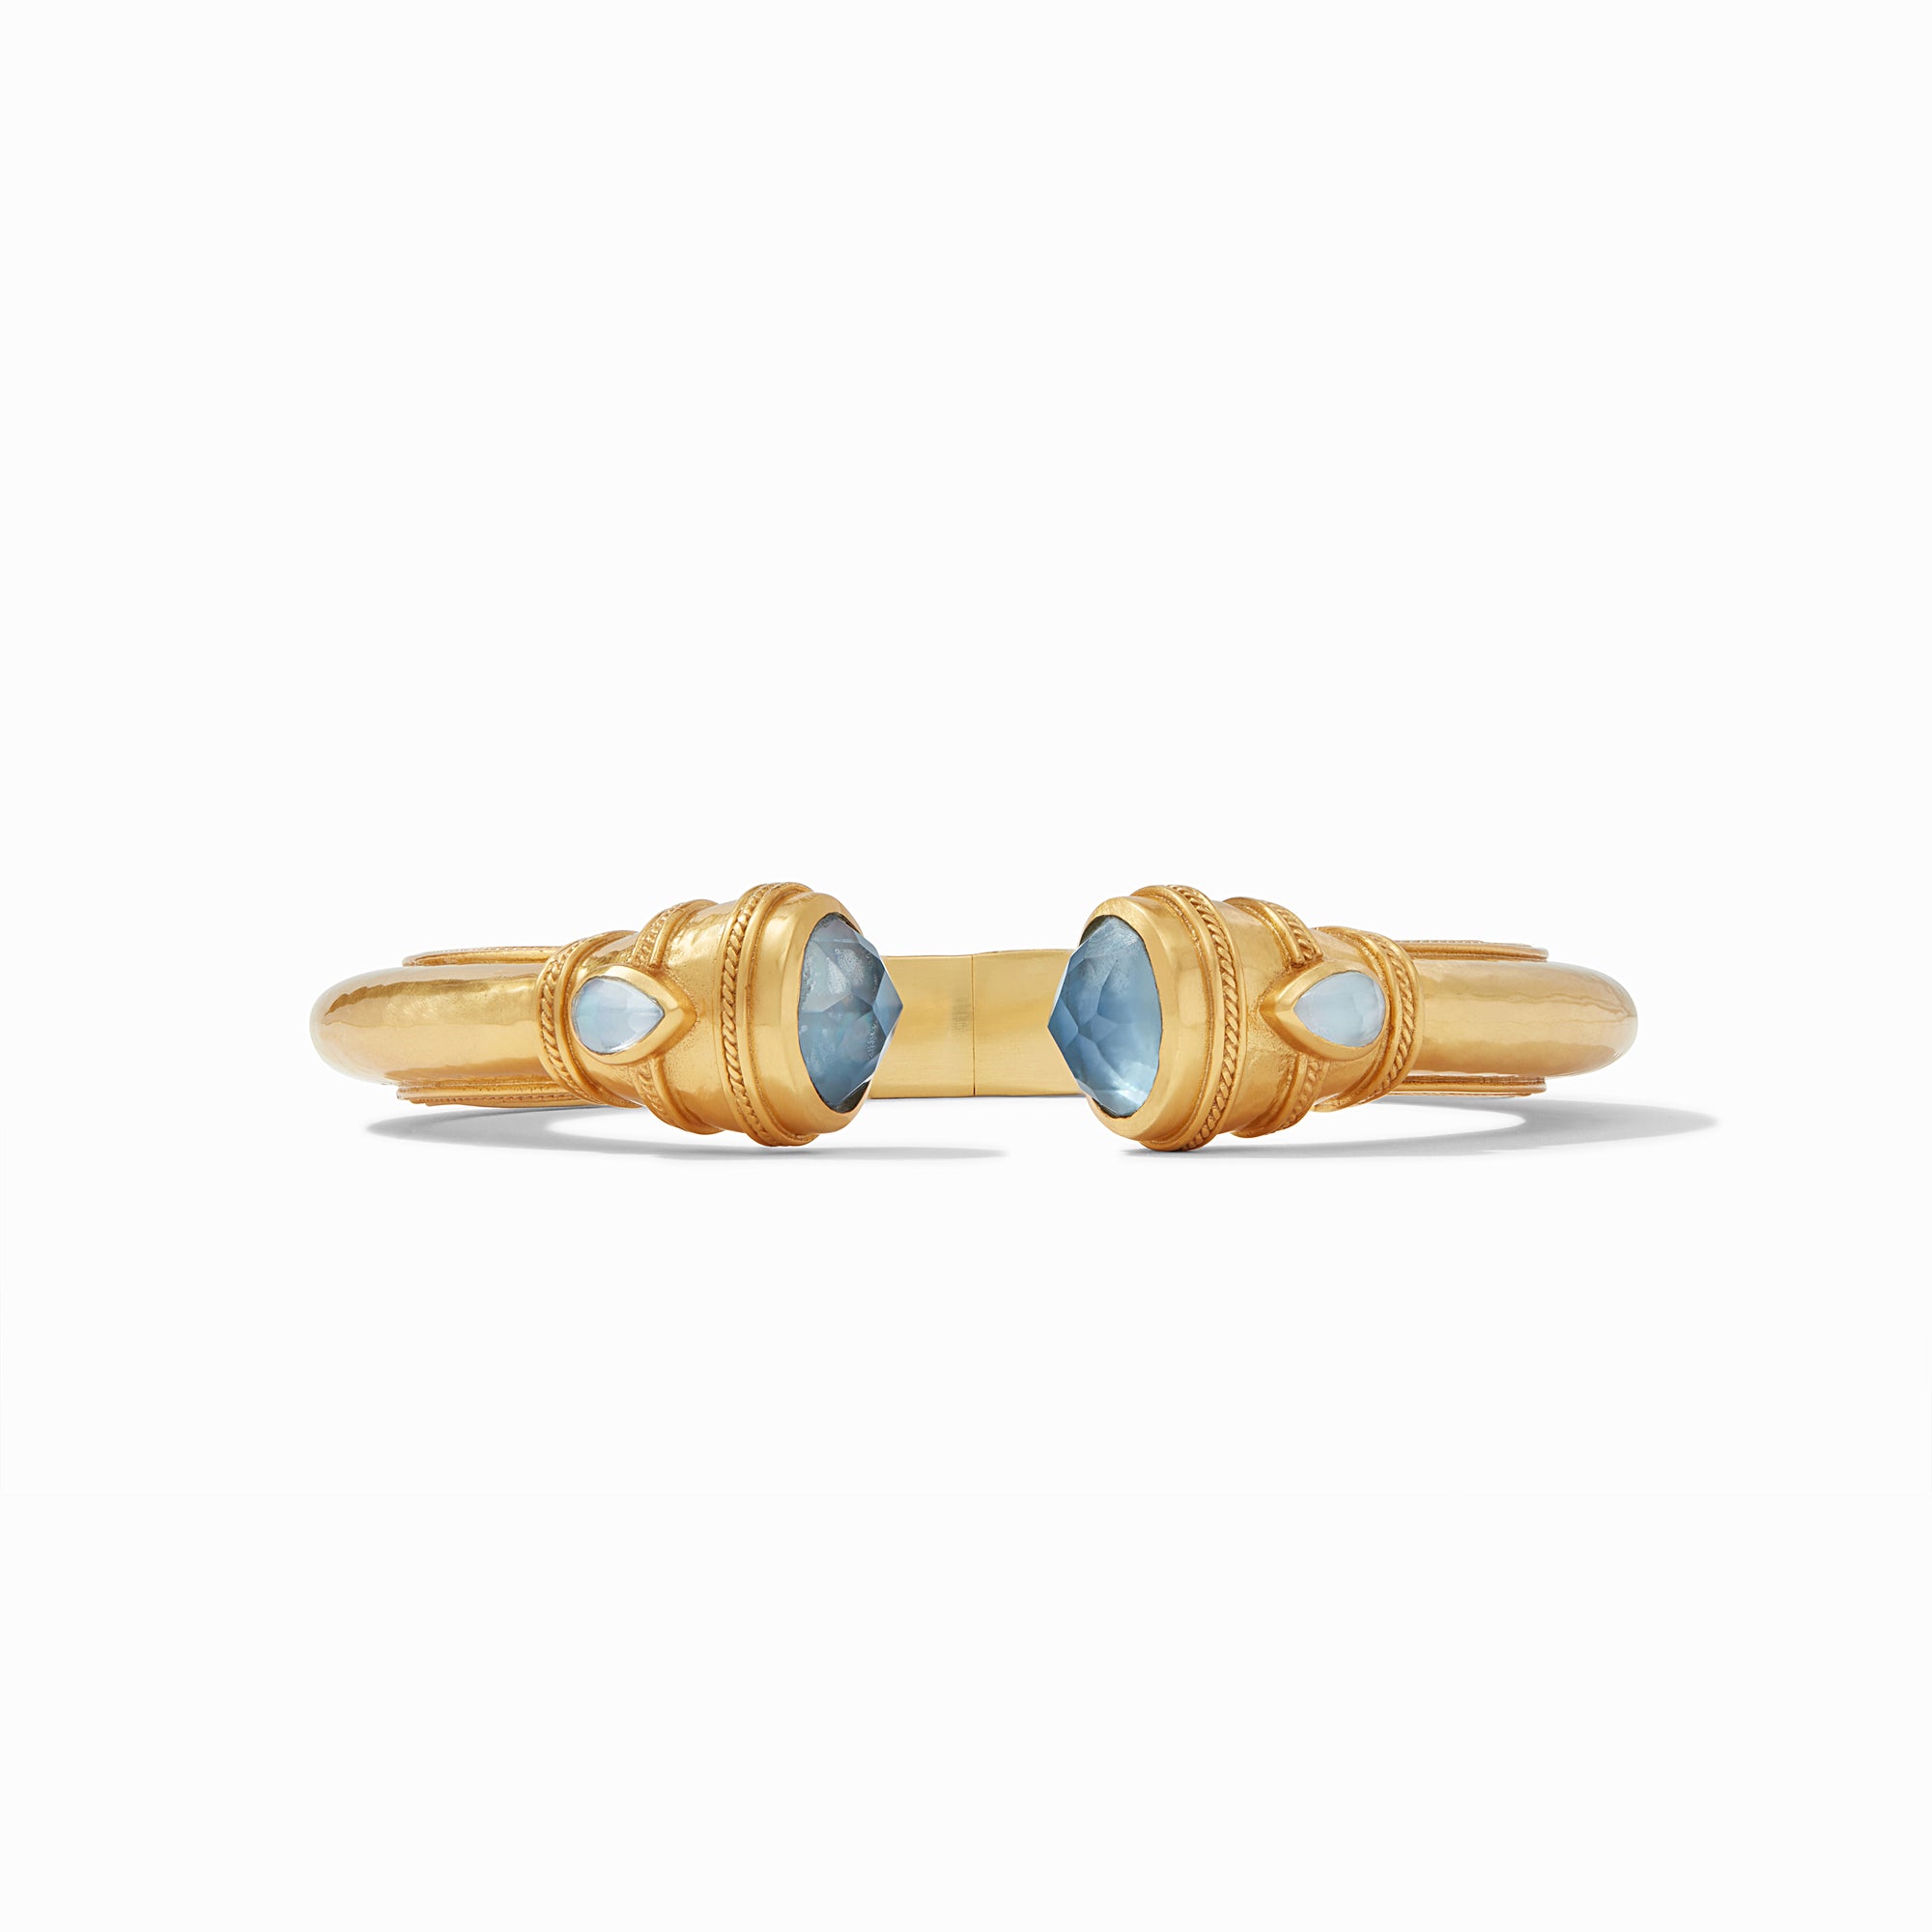 Cassis, a Julie Vos Hinge Cuff bracelet in the Iridescent Chalcedony Blue option